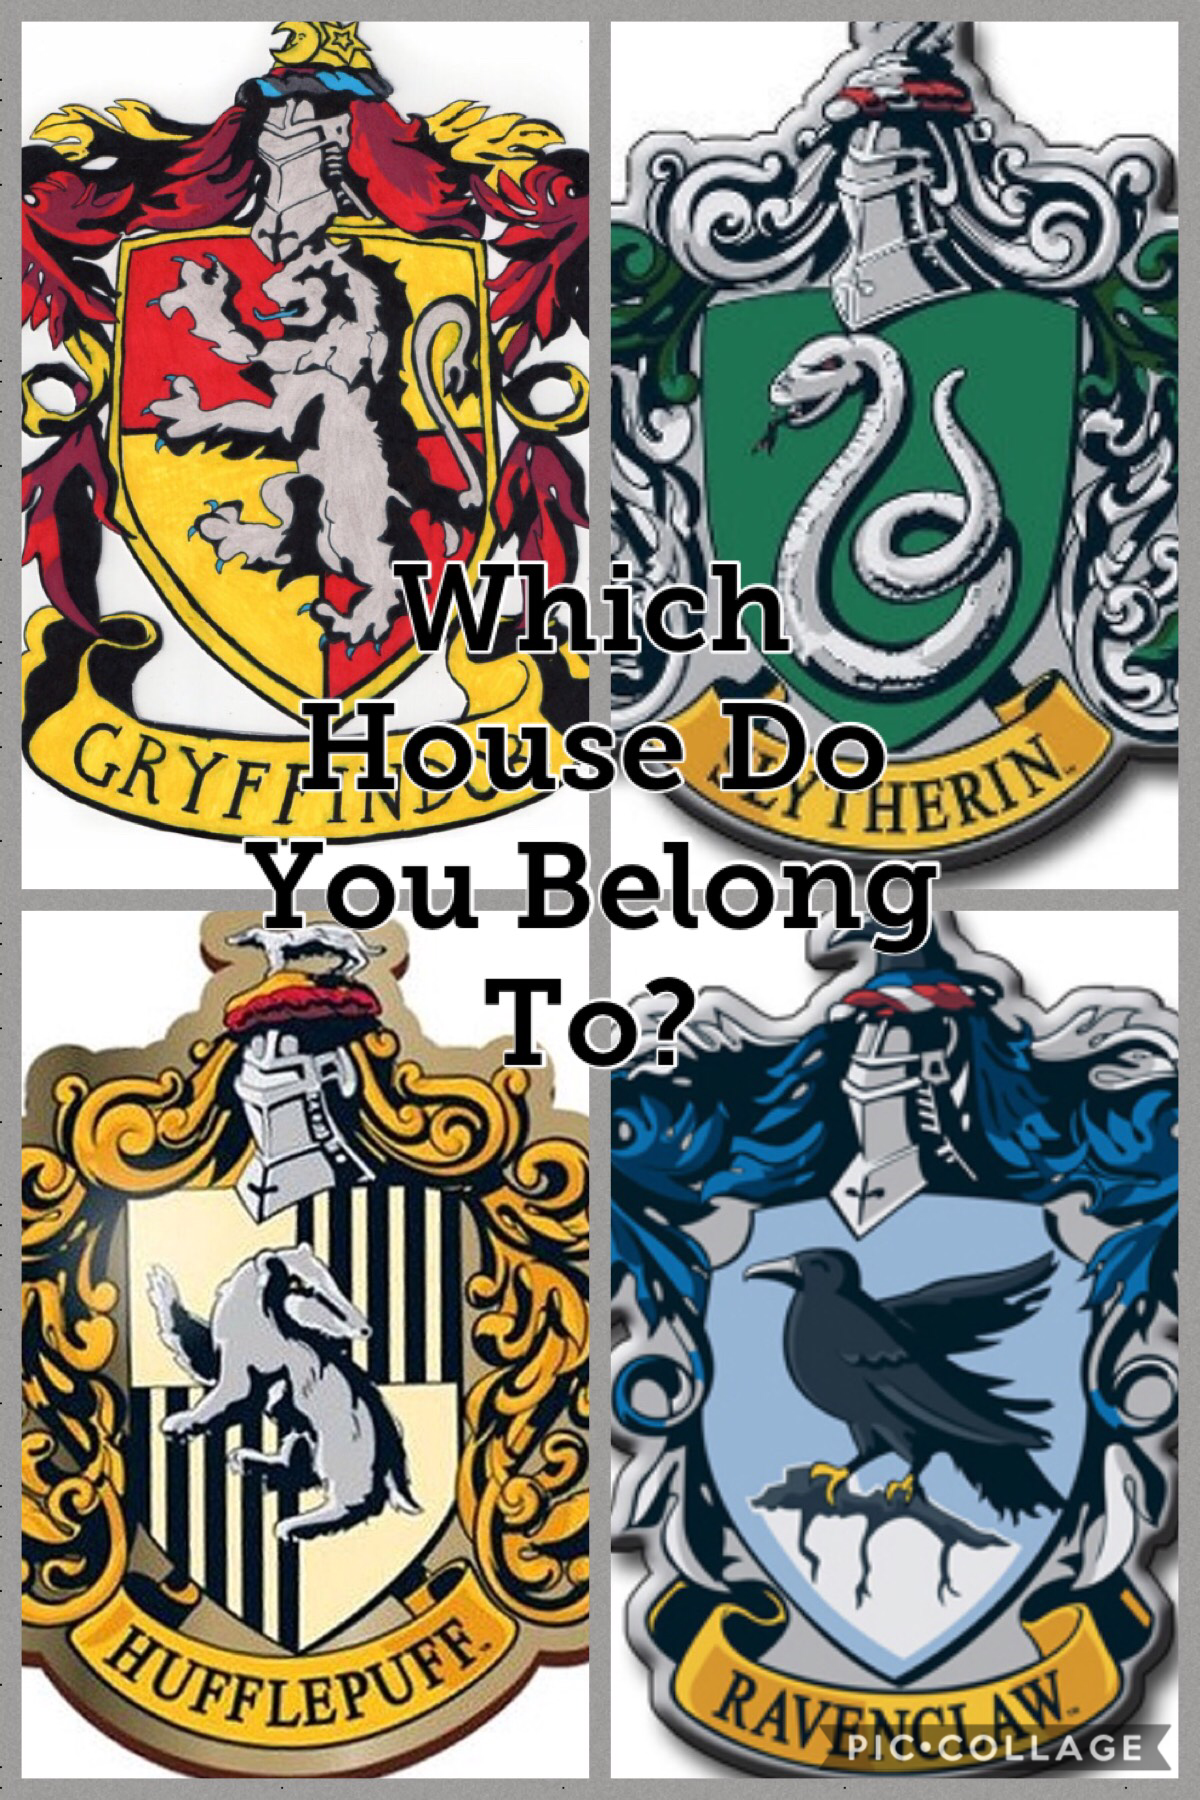 Comment which house u r in!! if u don’t know and r a harry potter fan, take an online quiz now!⚡️